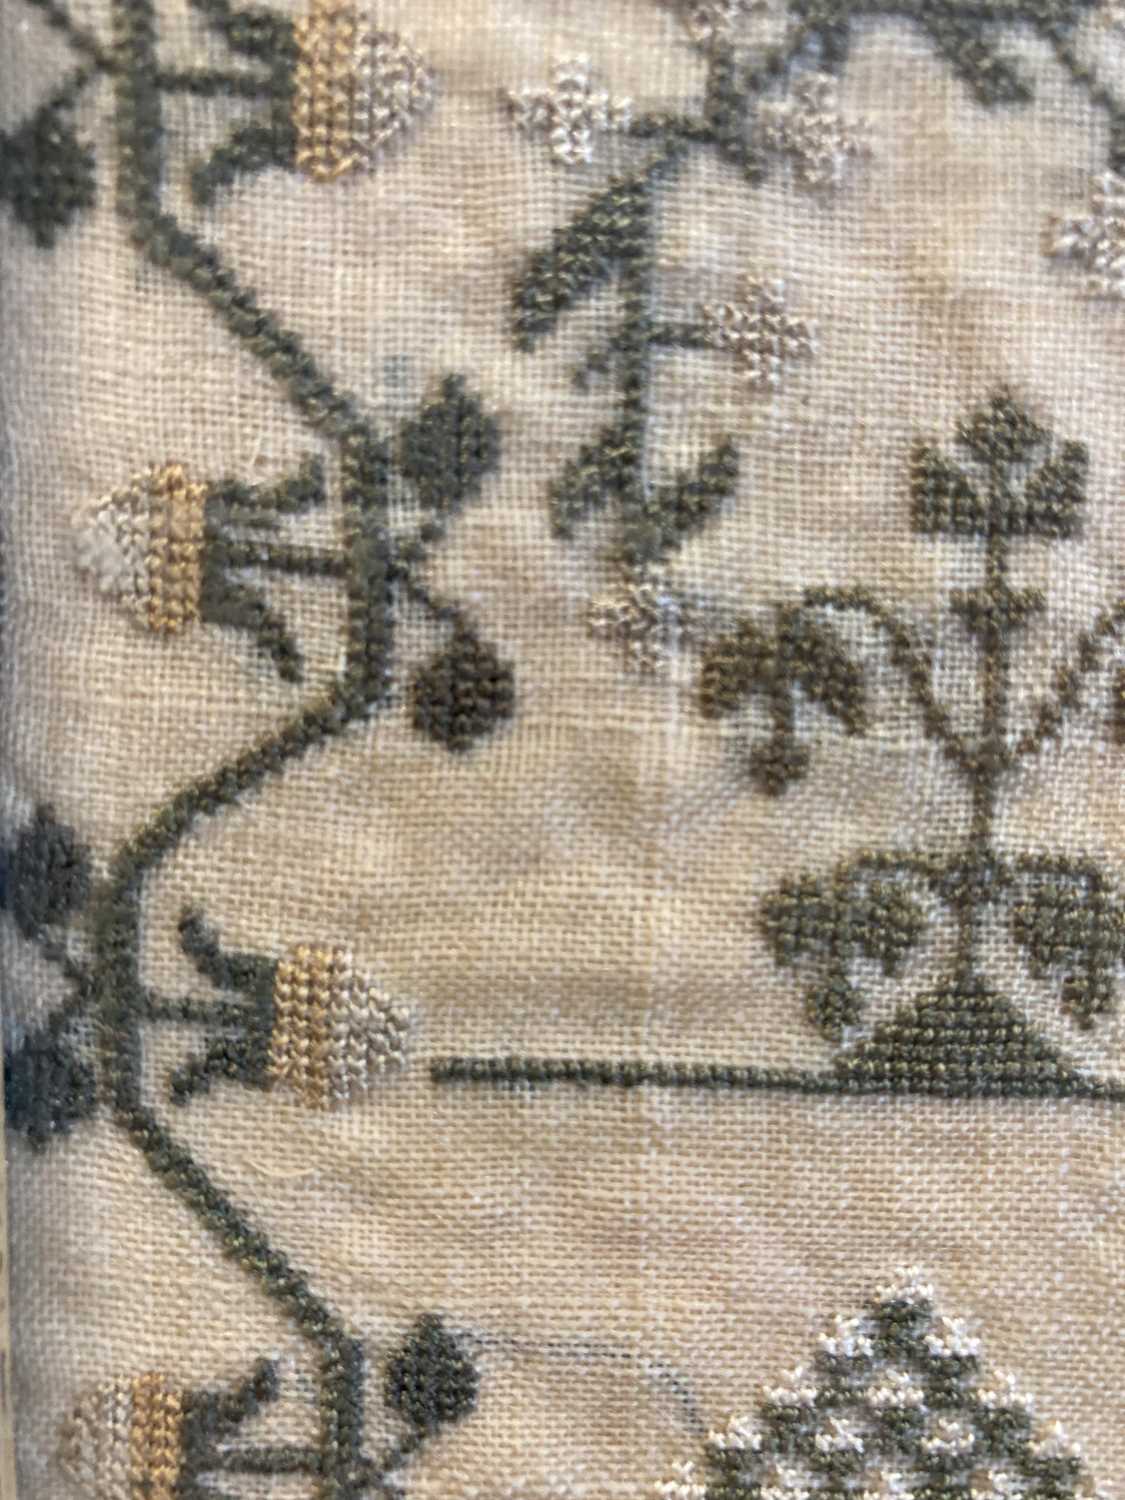 19th Century Needlework Sampler Worked by Emily Tufton Aged 12, 1865, the canvas is split into - Image 5 of 5